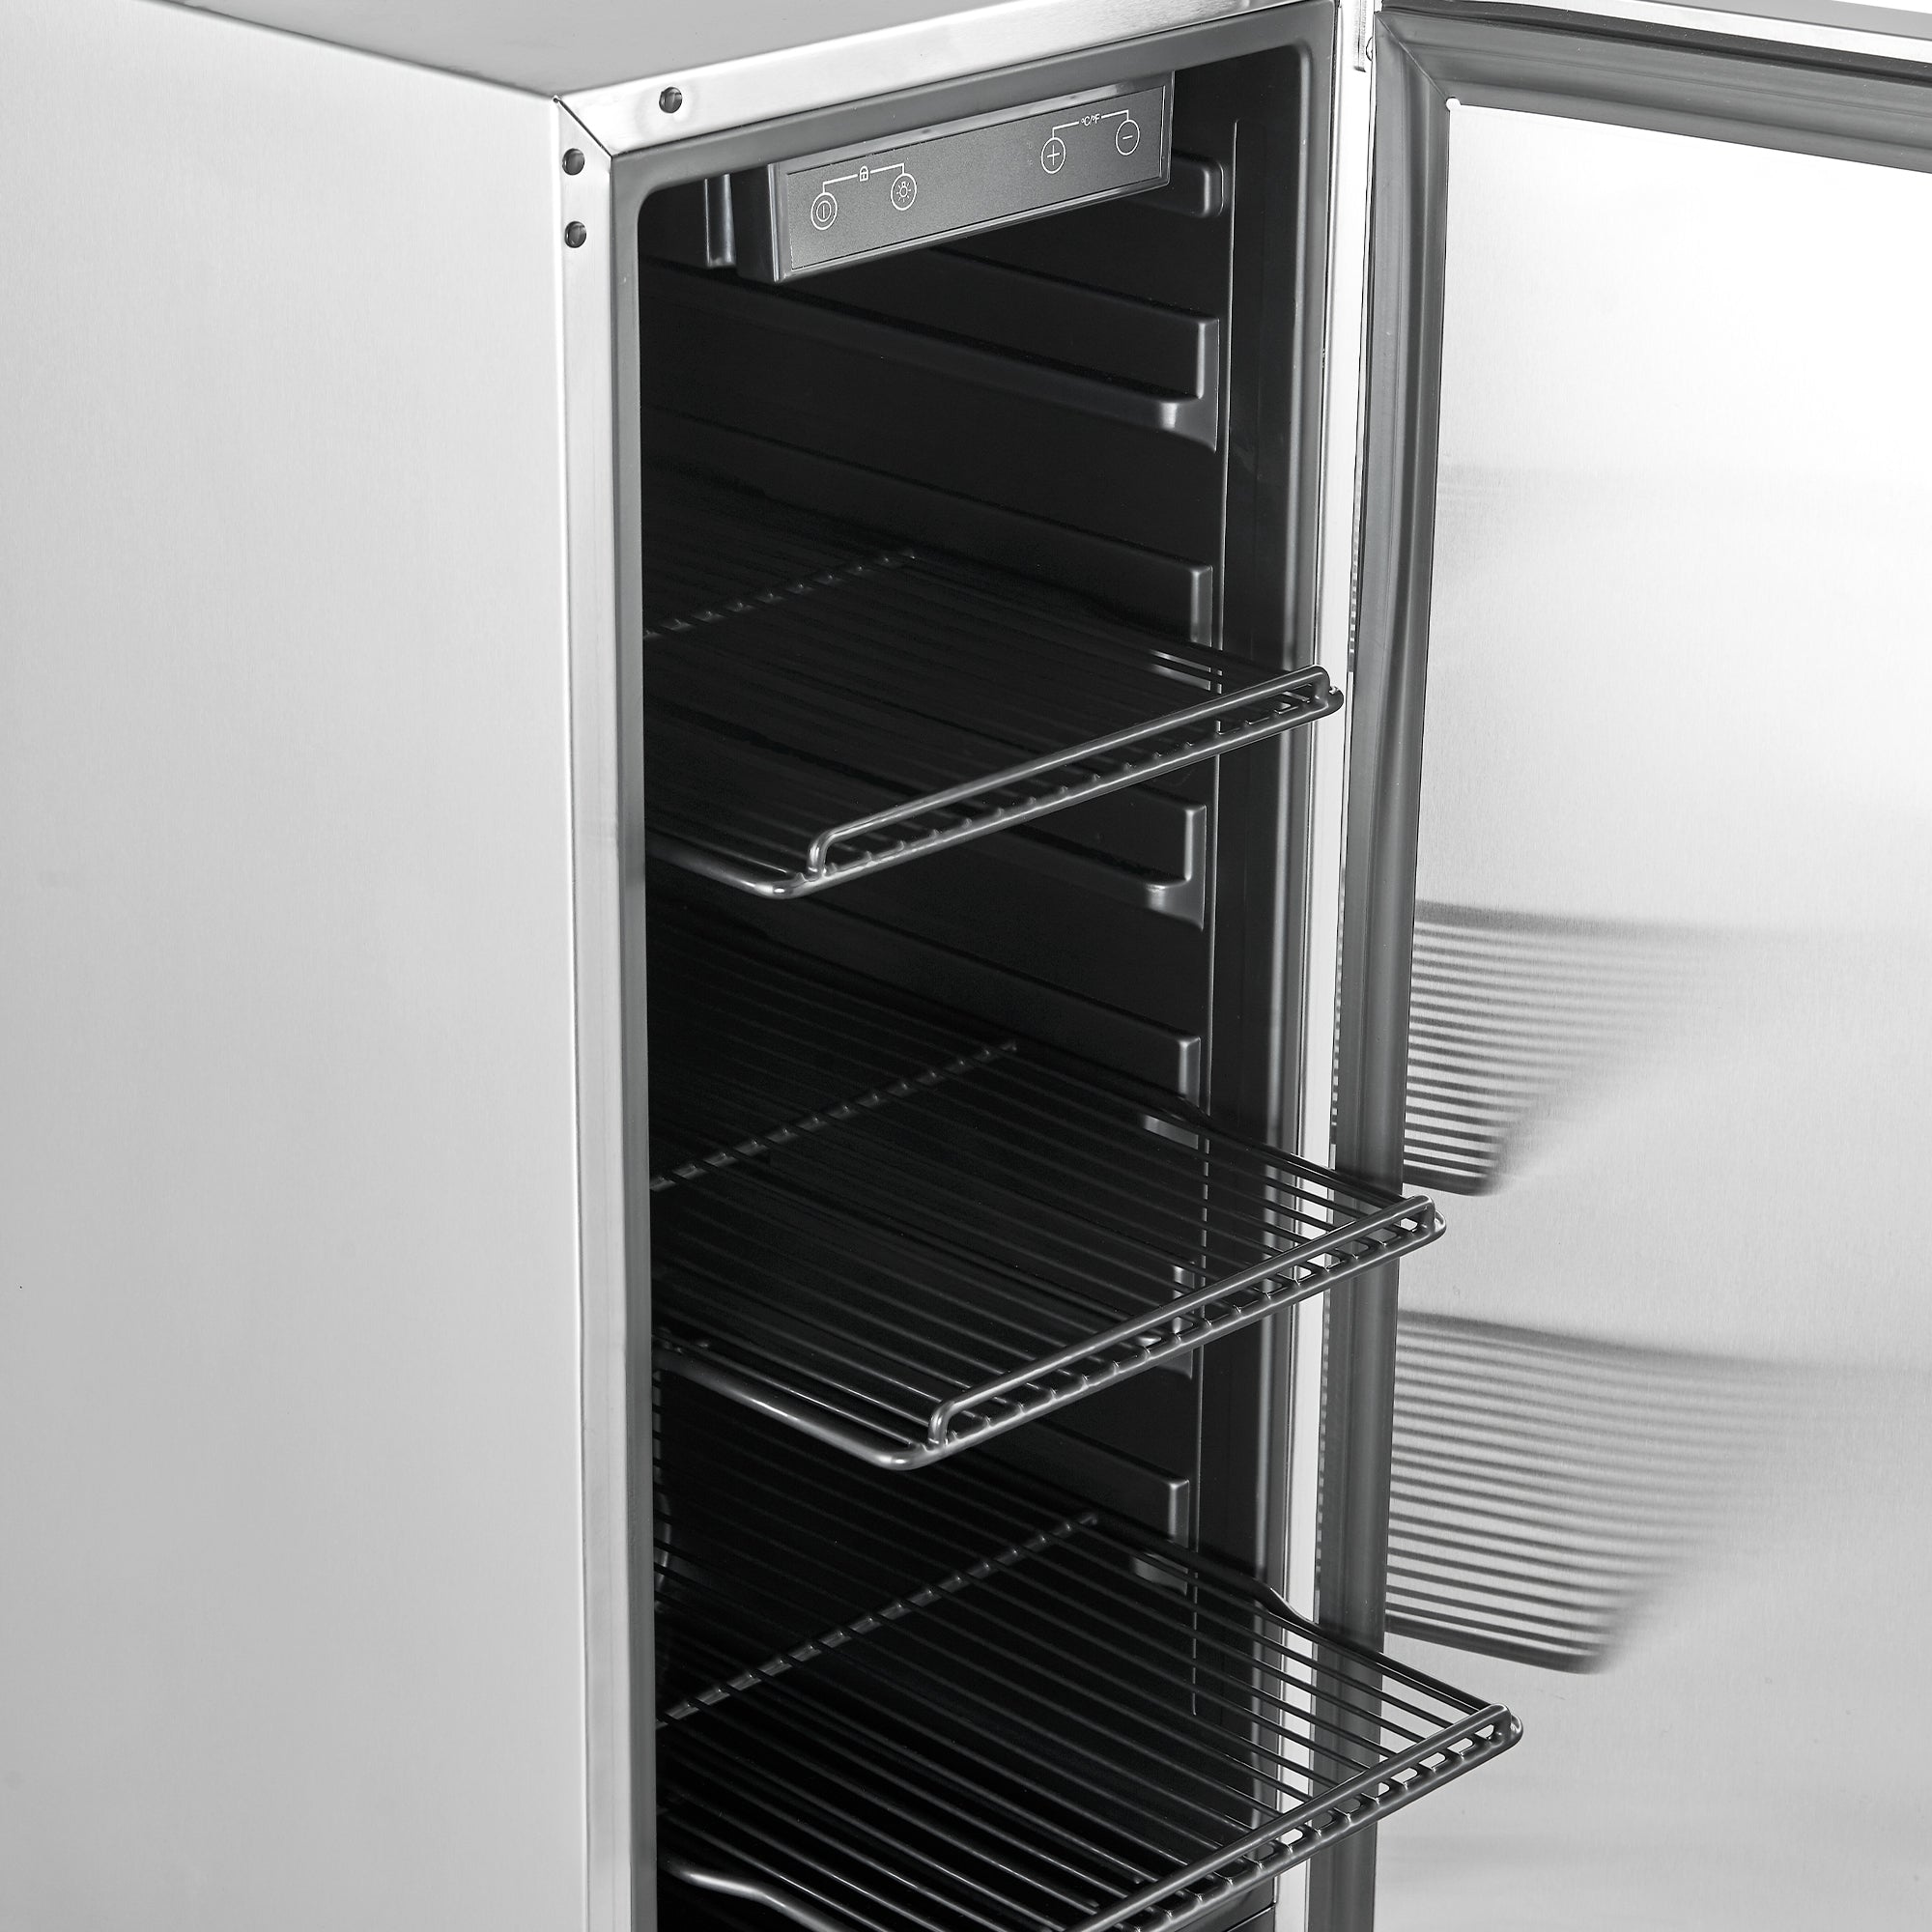 Close-up side view of a 3.2 Cu Ft Chrome Beverage Outdoor Refrigerator 96 cans with the door open, revealing three interior shelves and a digital temperature control panel